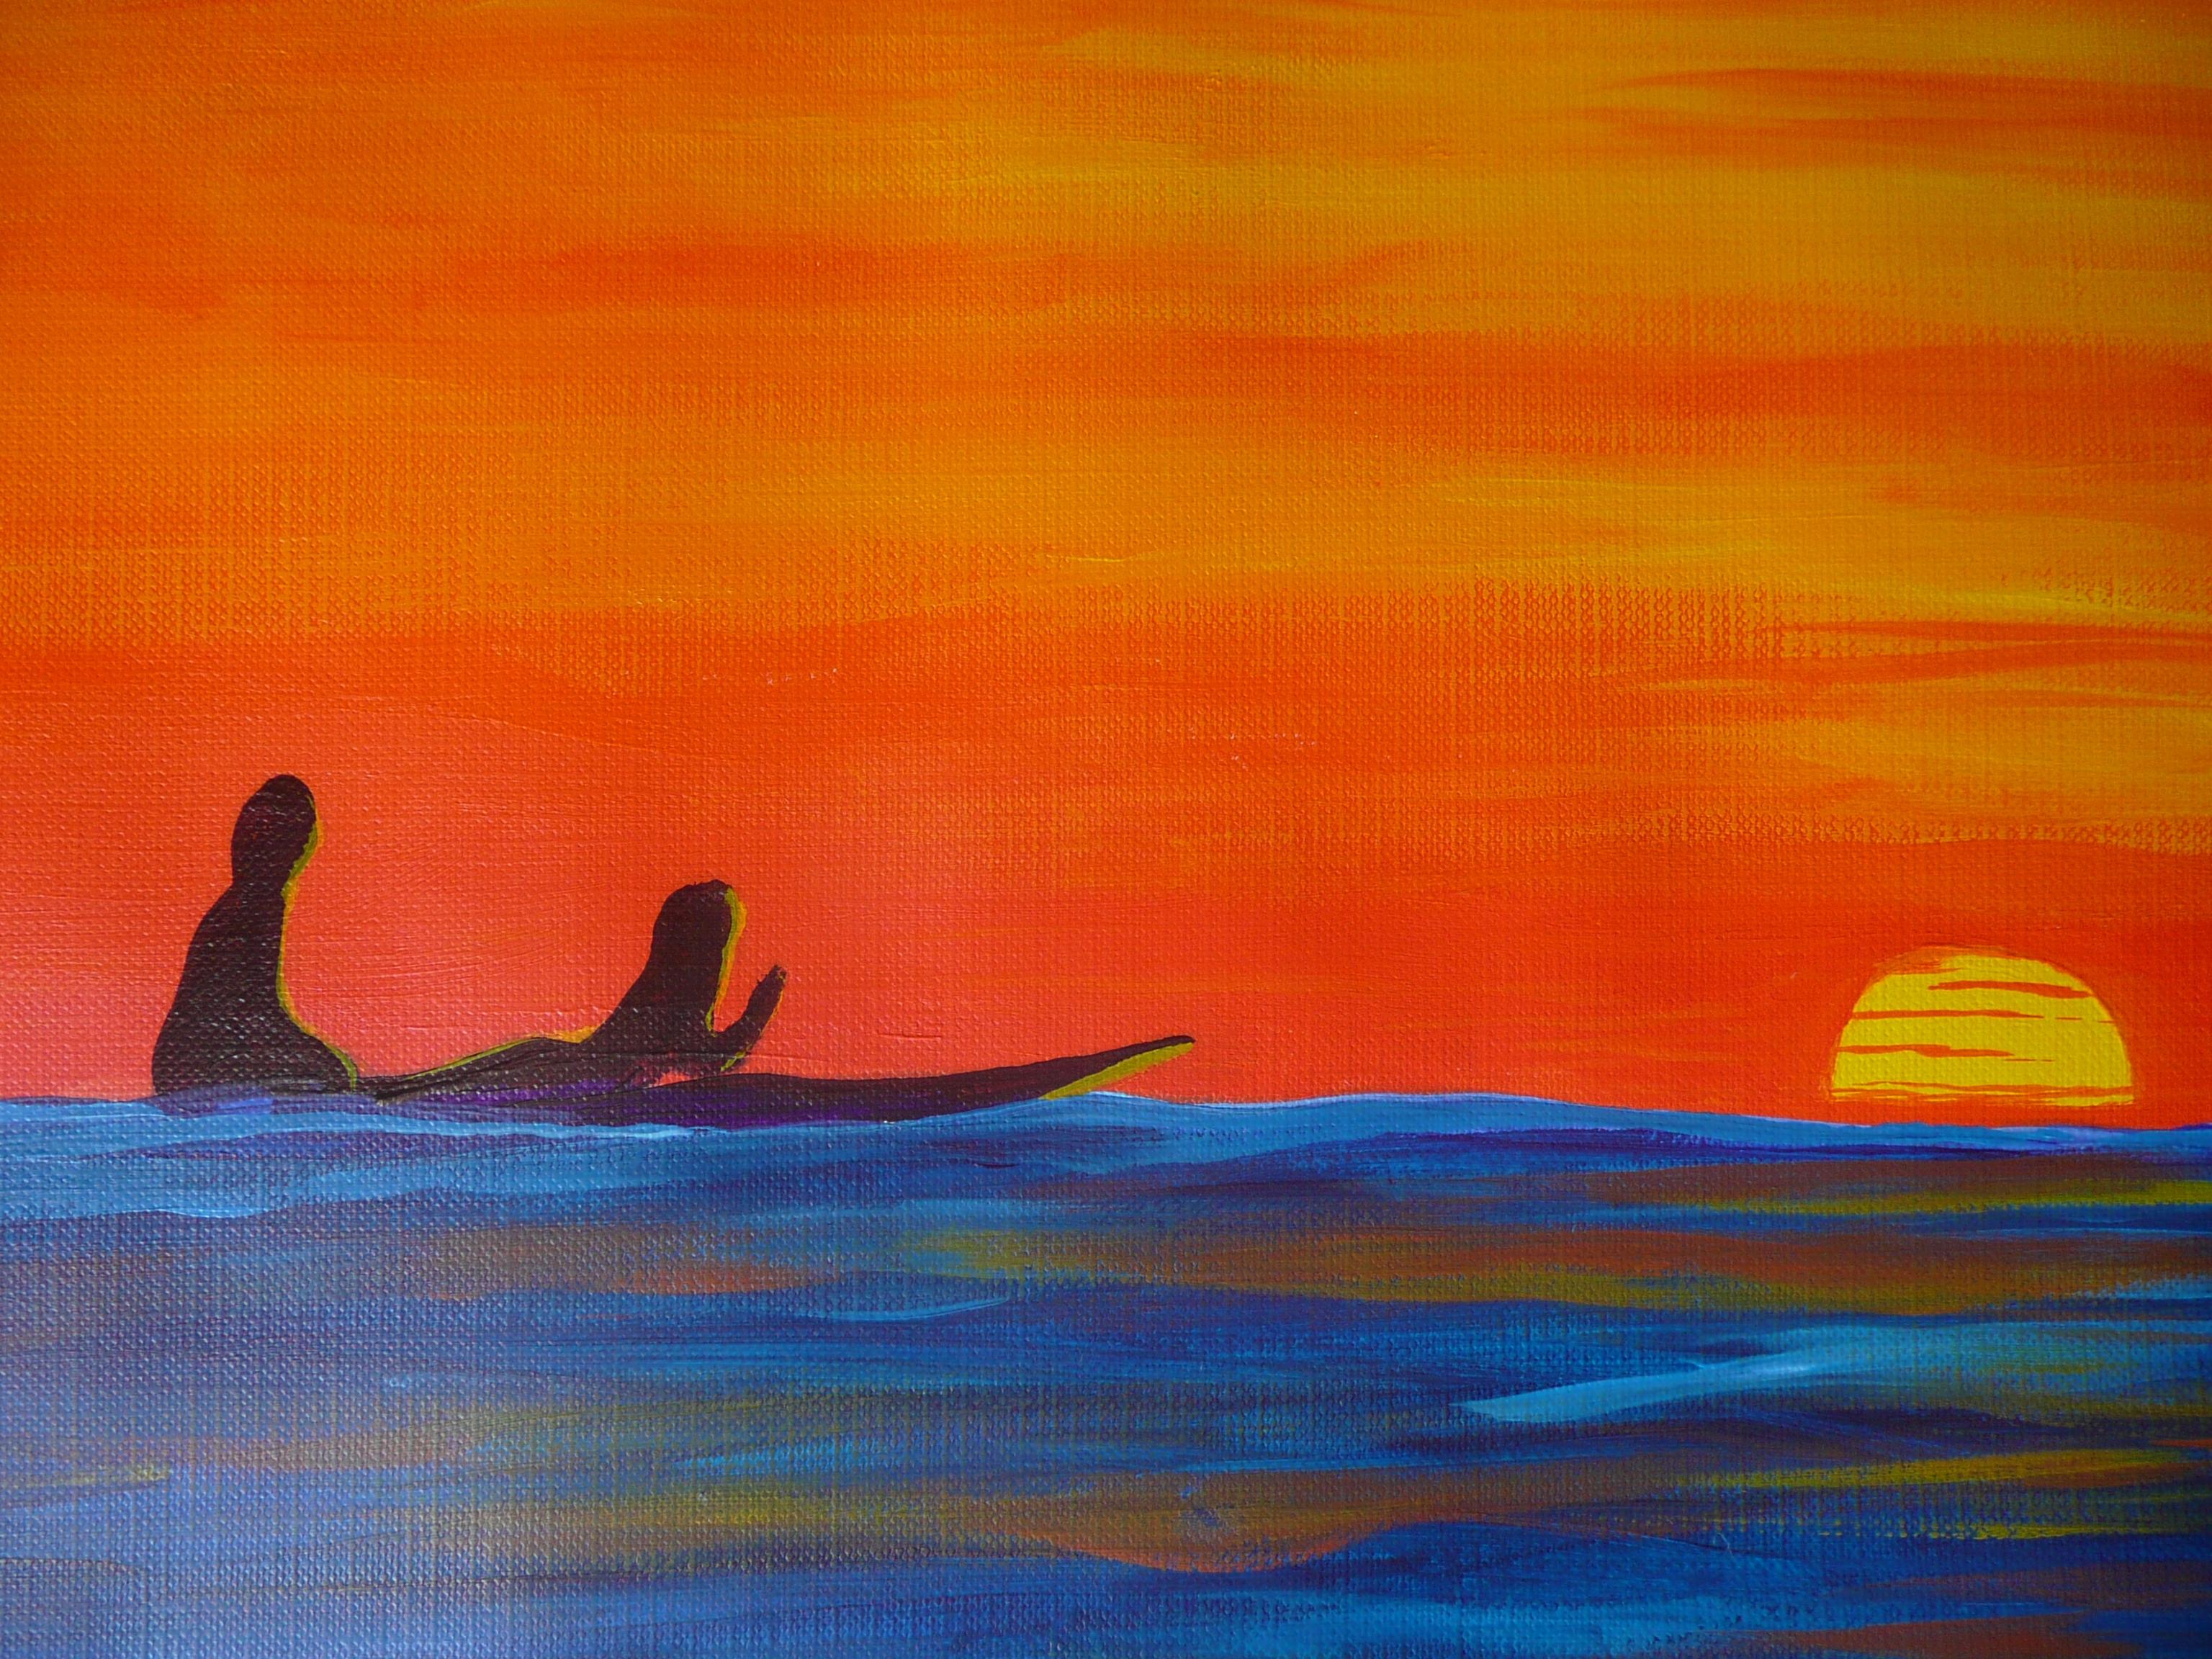 As the sun drops below the horizon these surfers are treated to a glowing sky as they enjoy the last set of waves for the day.     This painting has been created using professional grade acrylics on archival quality 118 lb canvas paper.The overall